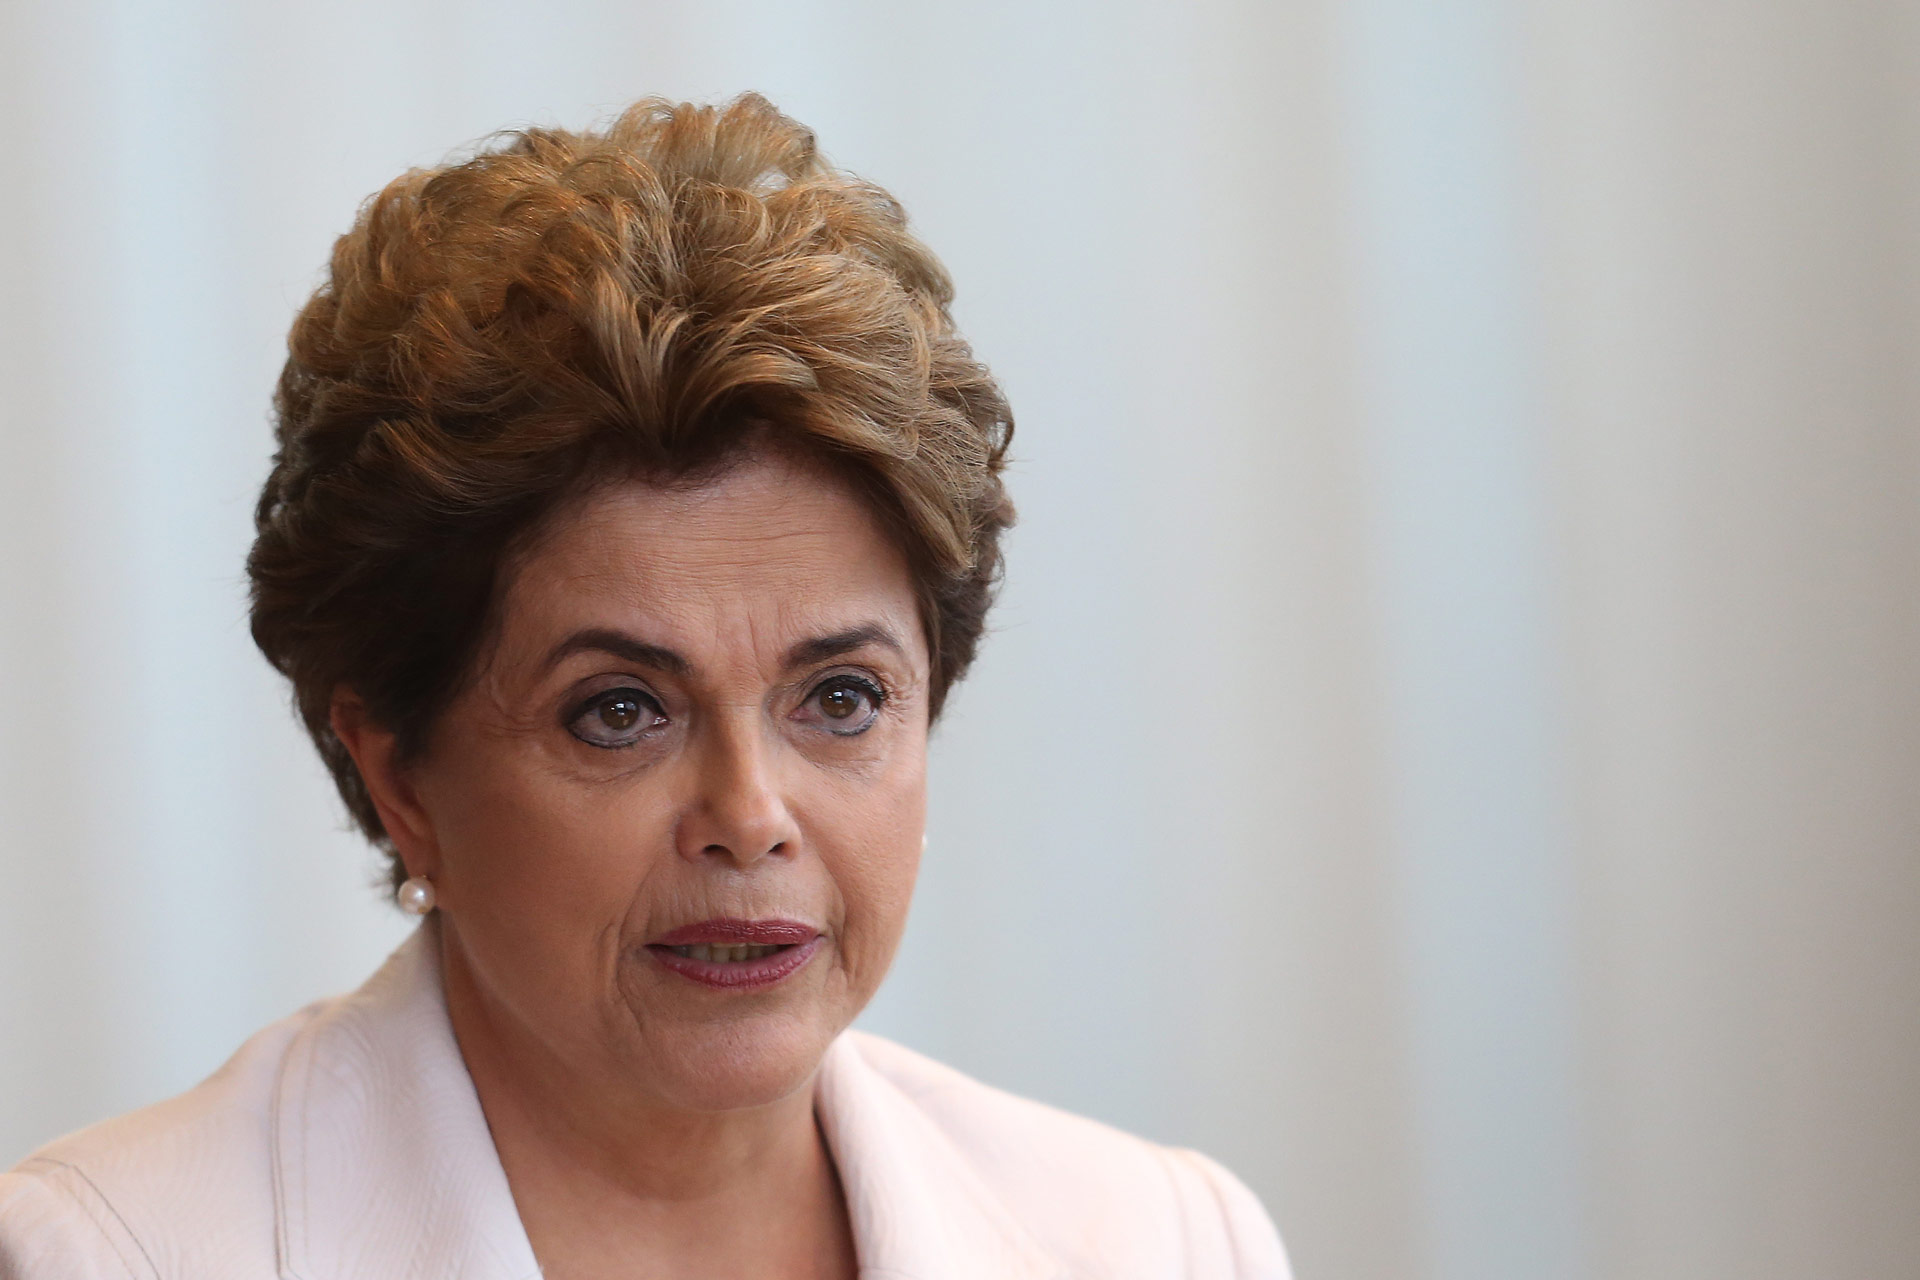 Former Brazilian President, Dilma Rousseff, criticizes the current government and calls for immediate elections